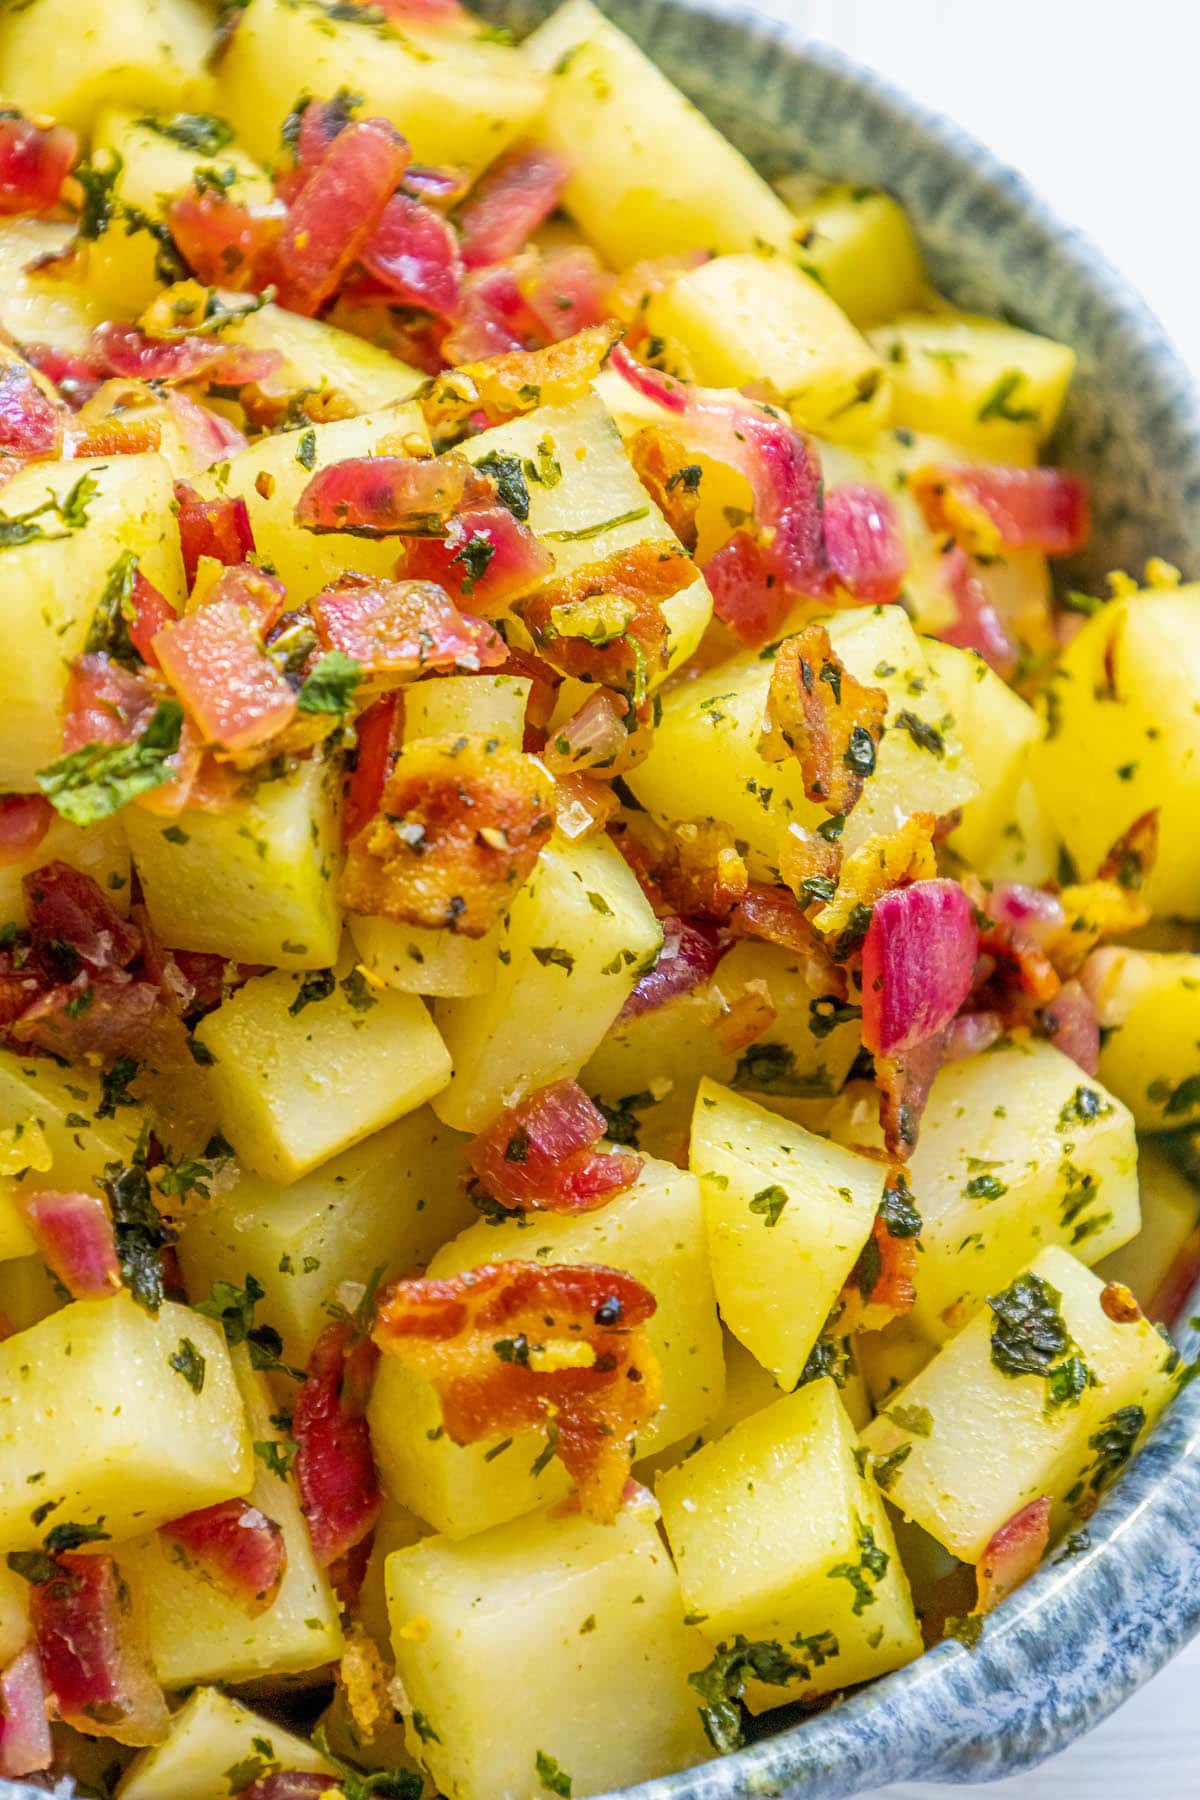 picture of german potato salad with red onions, herbs, and bacon on top in a blue bowl on a table